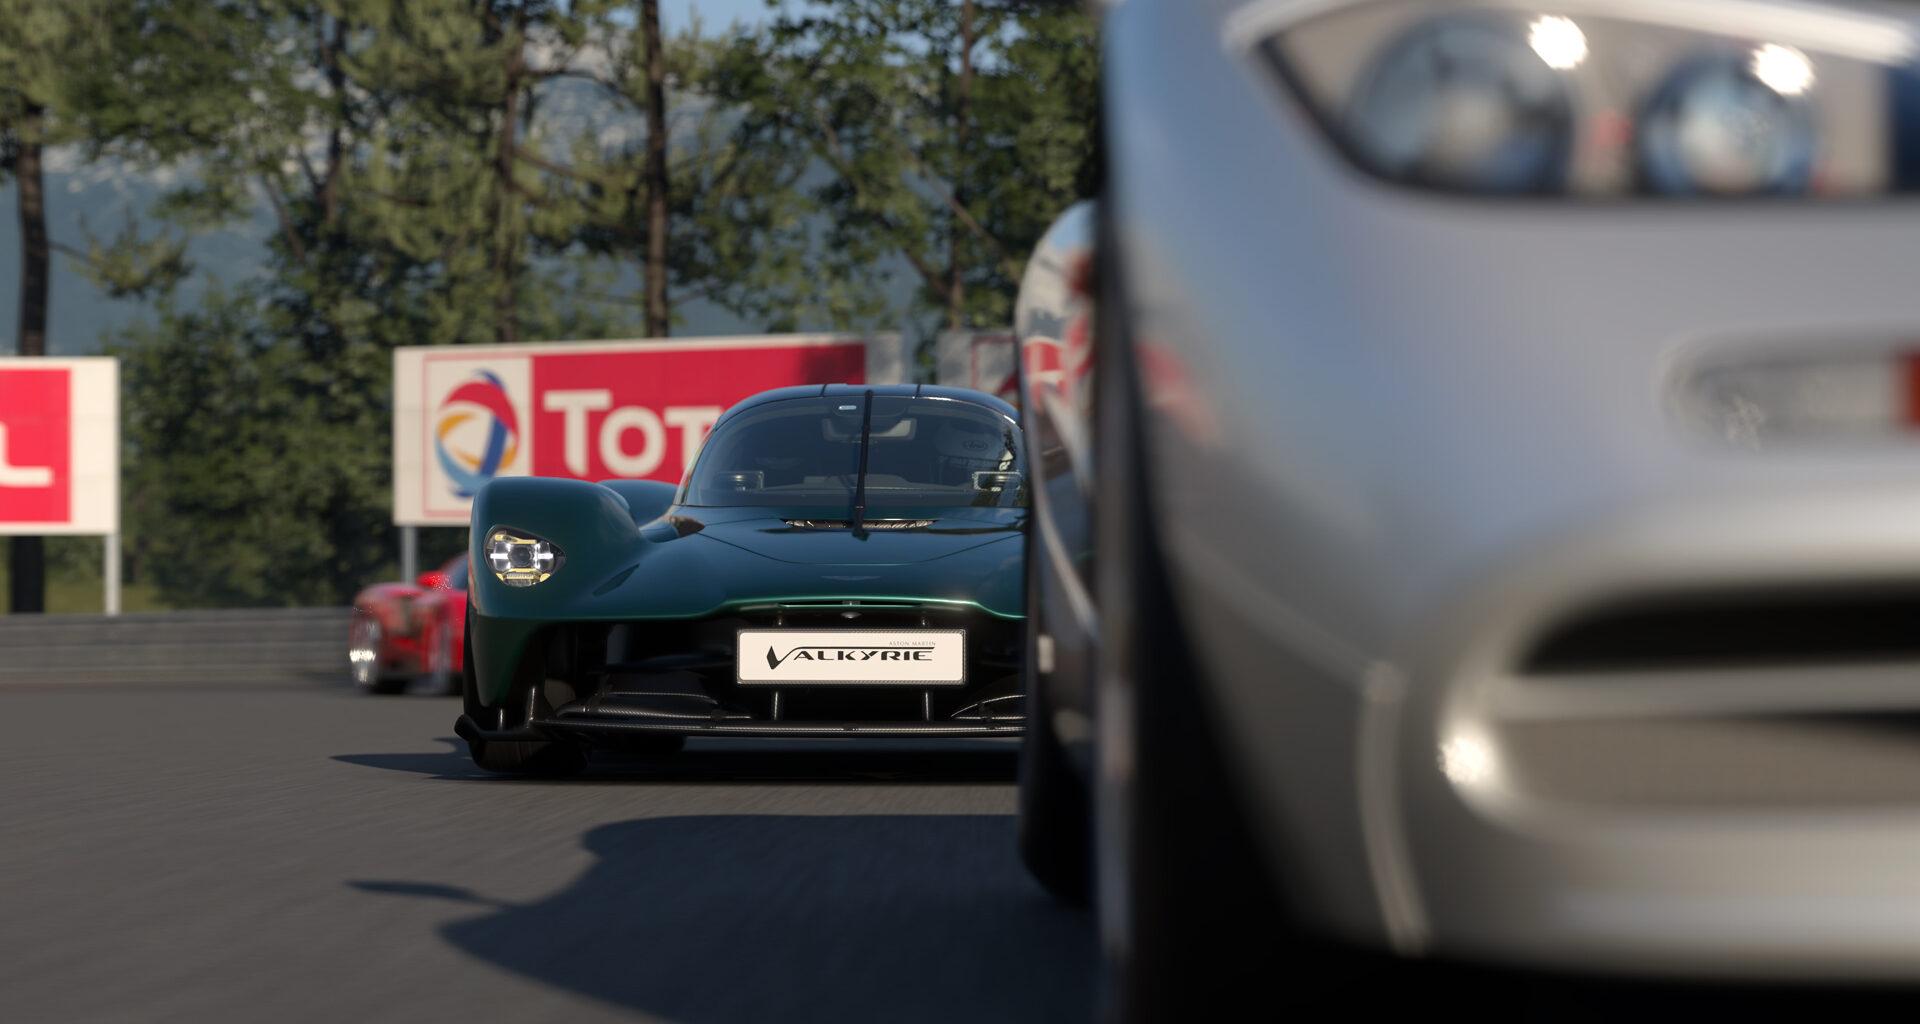 Gran Turismo 7's June 2023 update - all you need to know